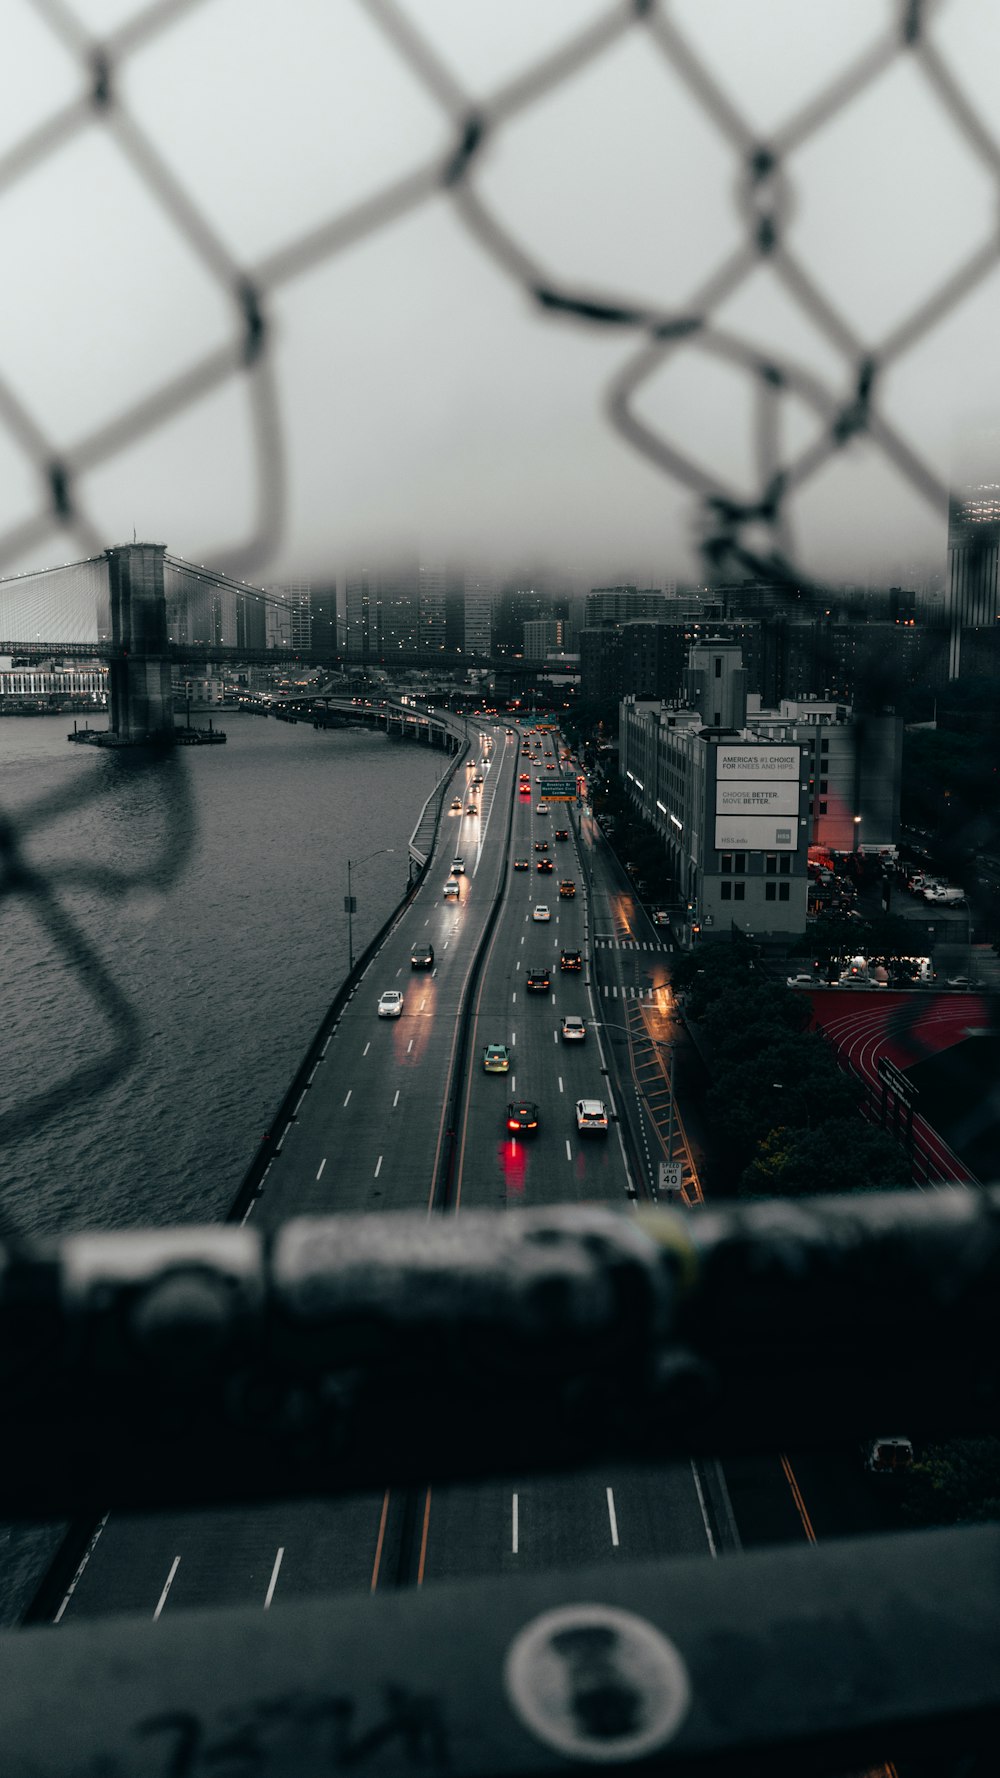 a view of a highway through a fence